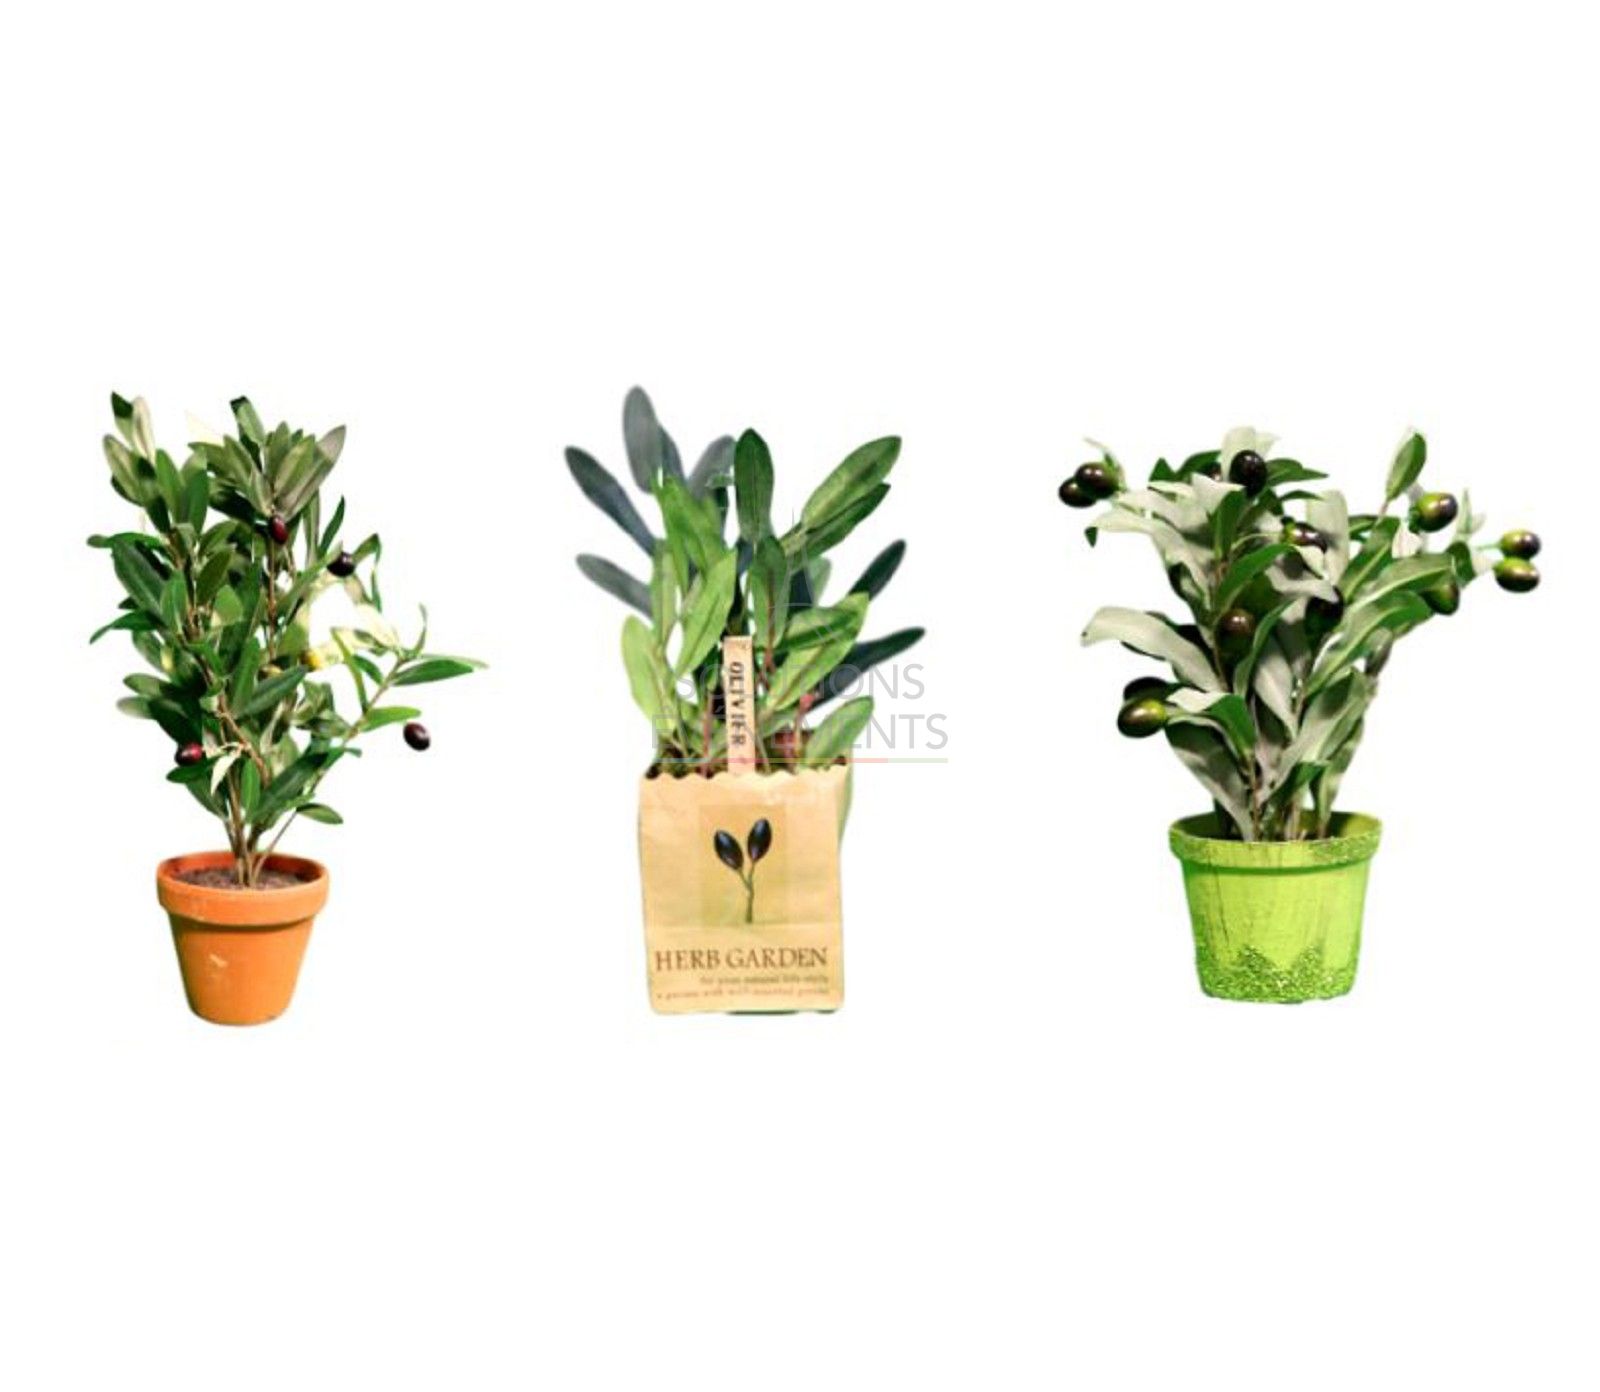 Rental of 5 mini artificial olive trees